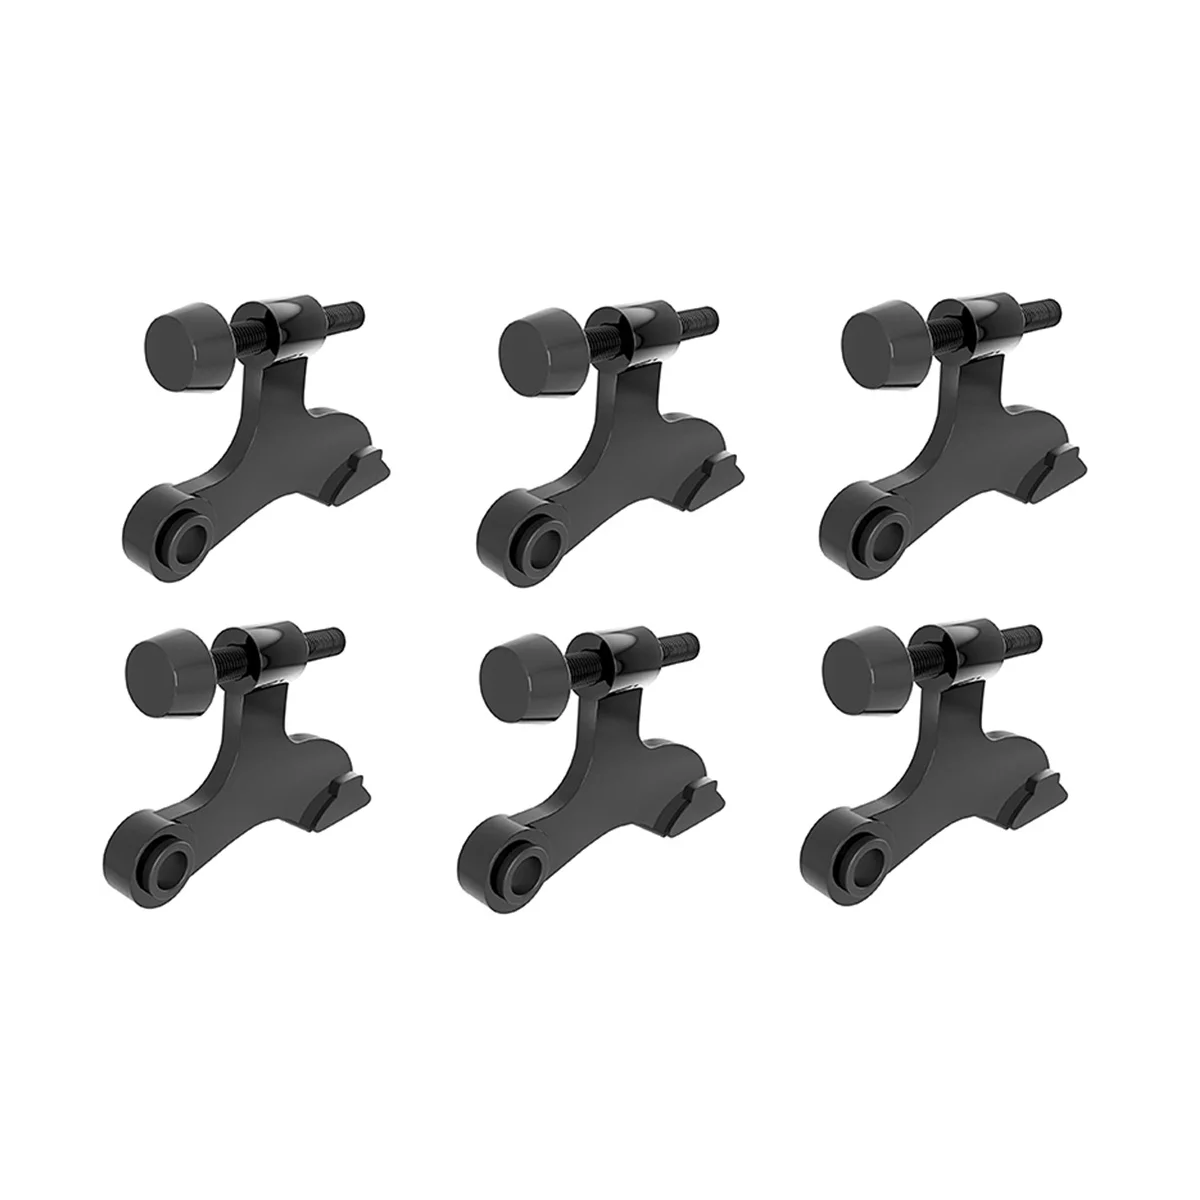 

6Pcs Hinge Pin Black Door Stopper Adjustable Heavy Duty Hinge with Rubber Bumper To Reduce Potential Damage Wall Dents